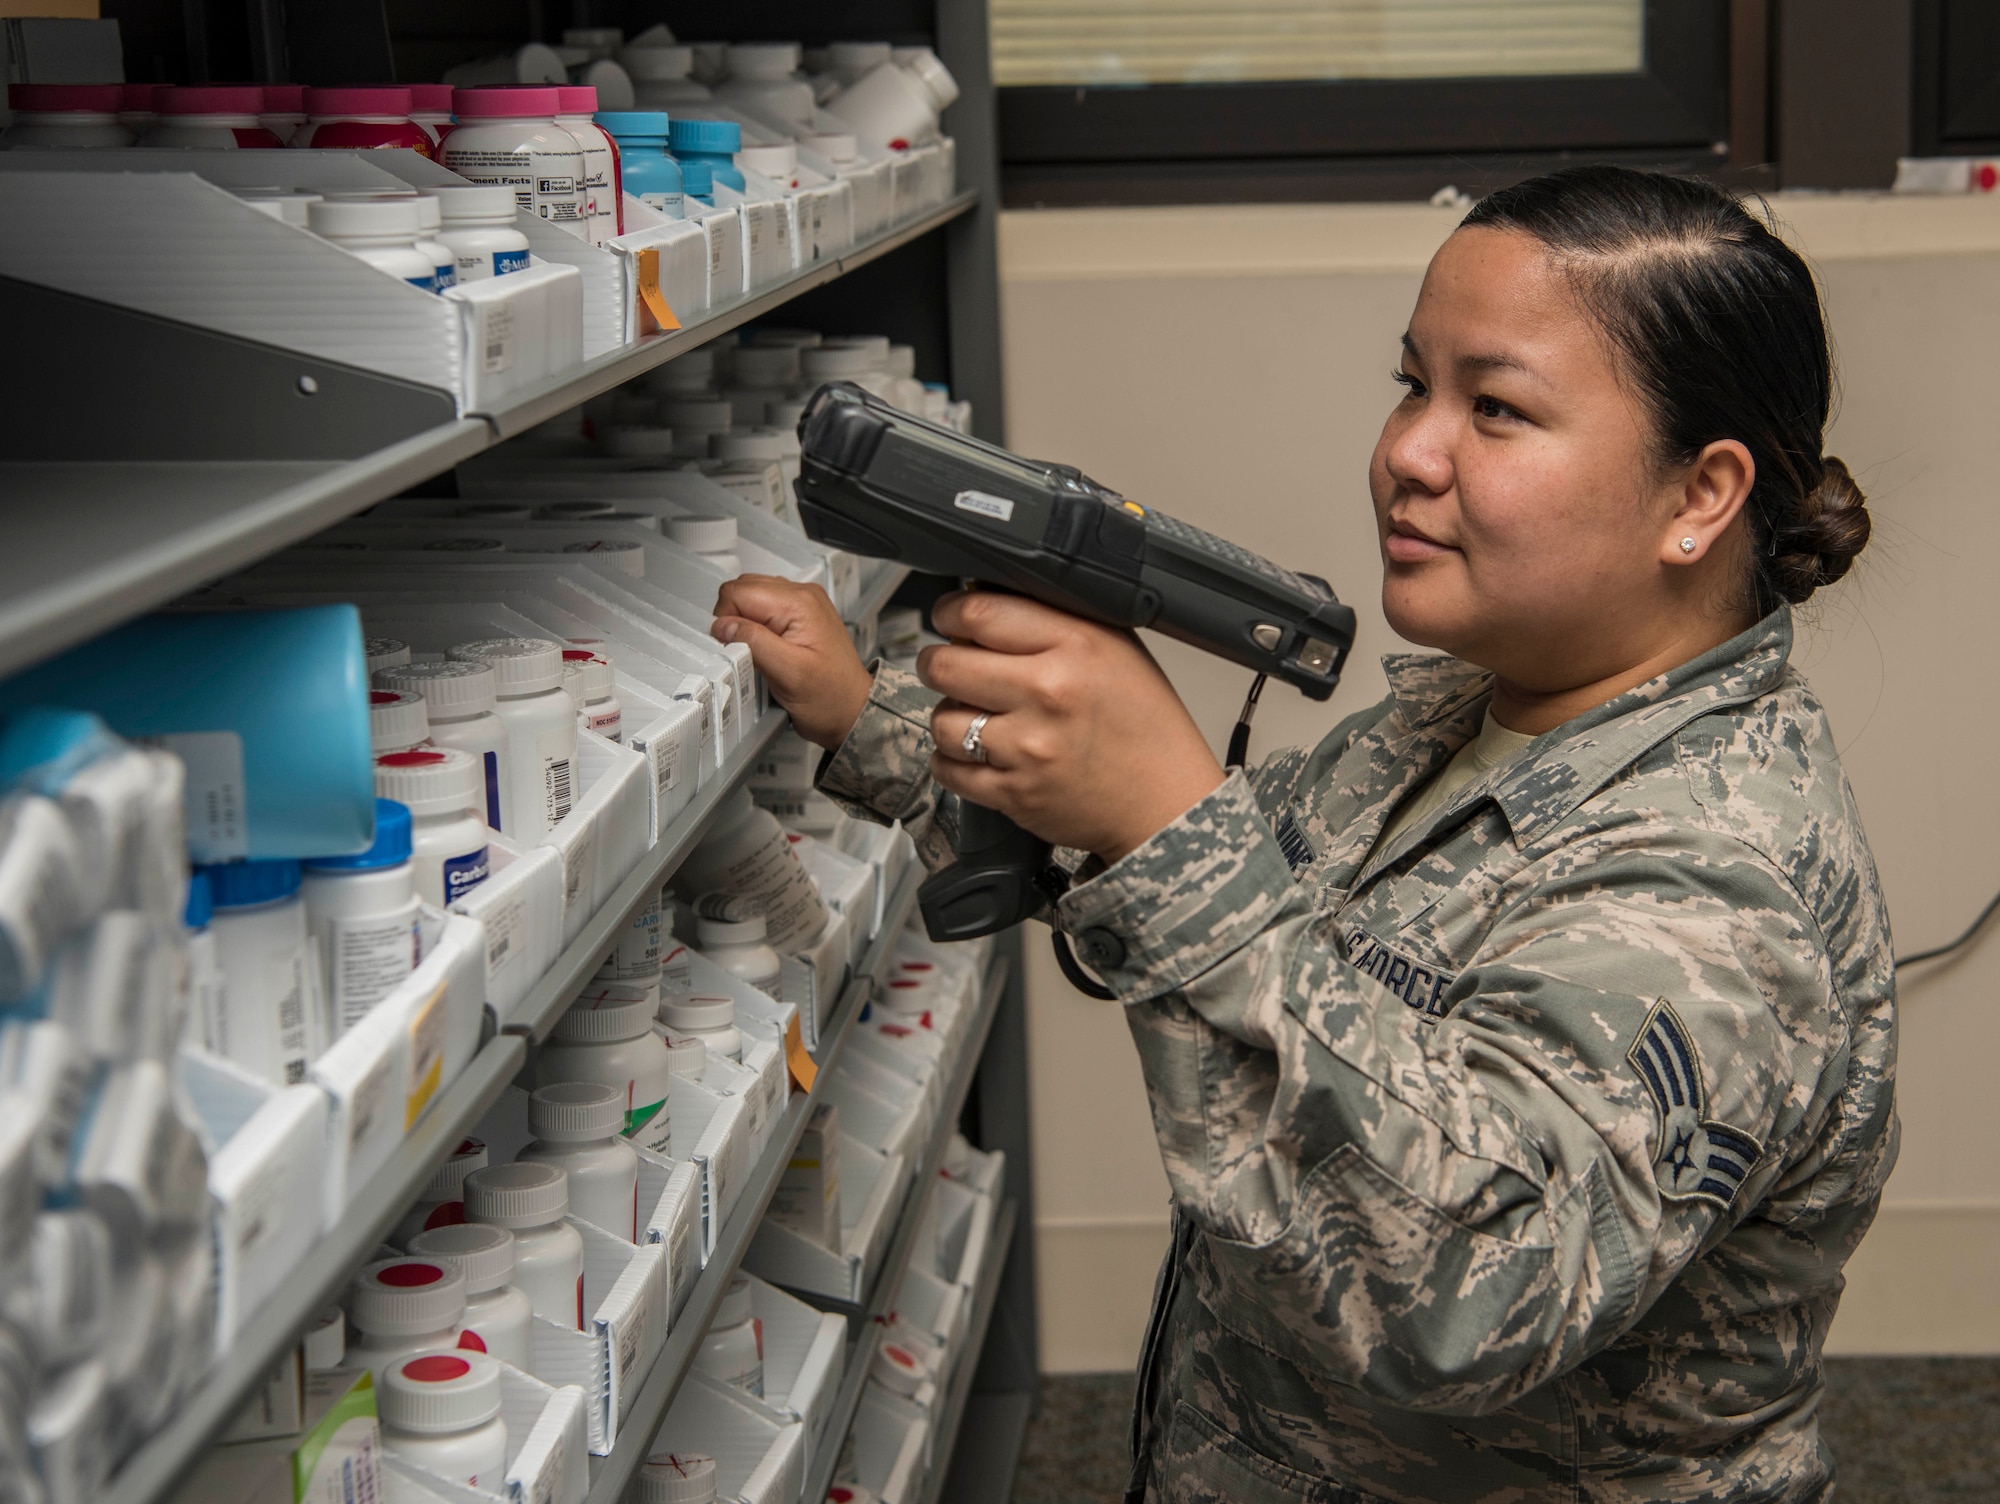 Senior Airman Andrea Aquino, 375th Medical Support Squadron pharmacy technician, scans a prescription May 29, 2018, Scott Air Force Base, Ill. Aquino's family has a long and proud tradition of serving in the United States military. (U.S. Air Force photo by Senior Airman Melissa Estevez)